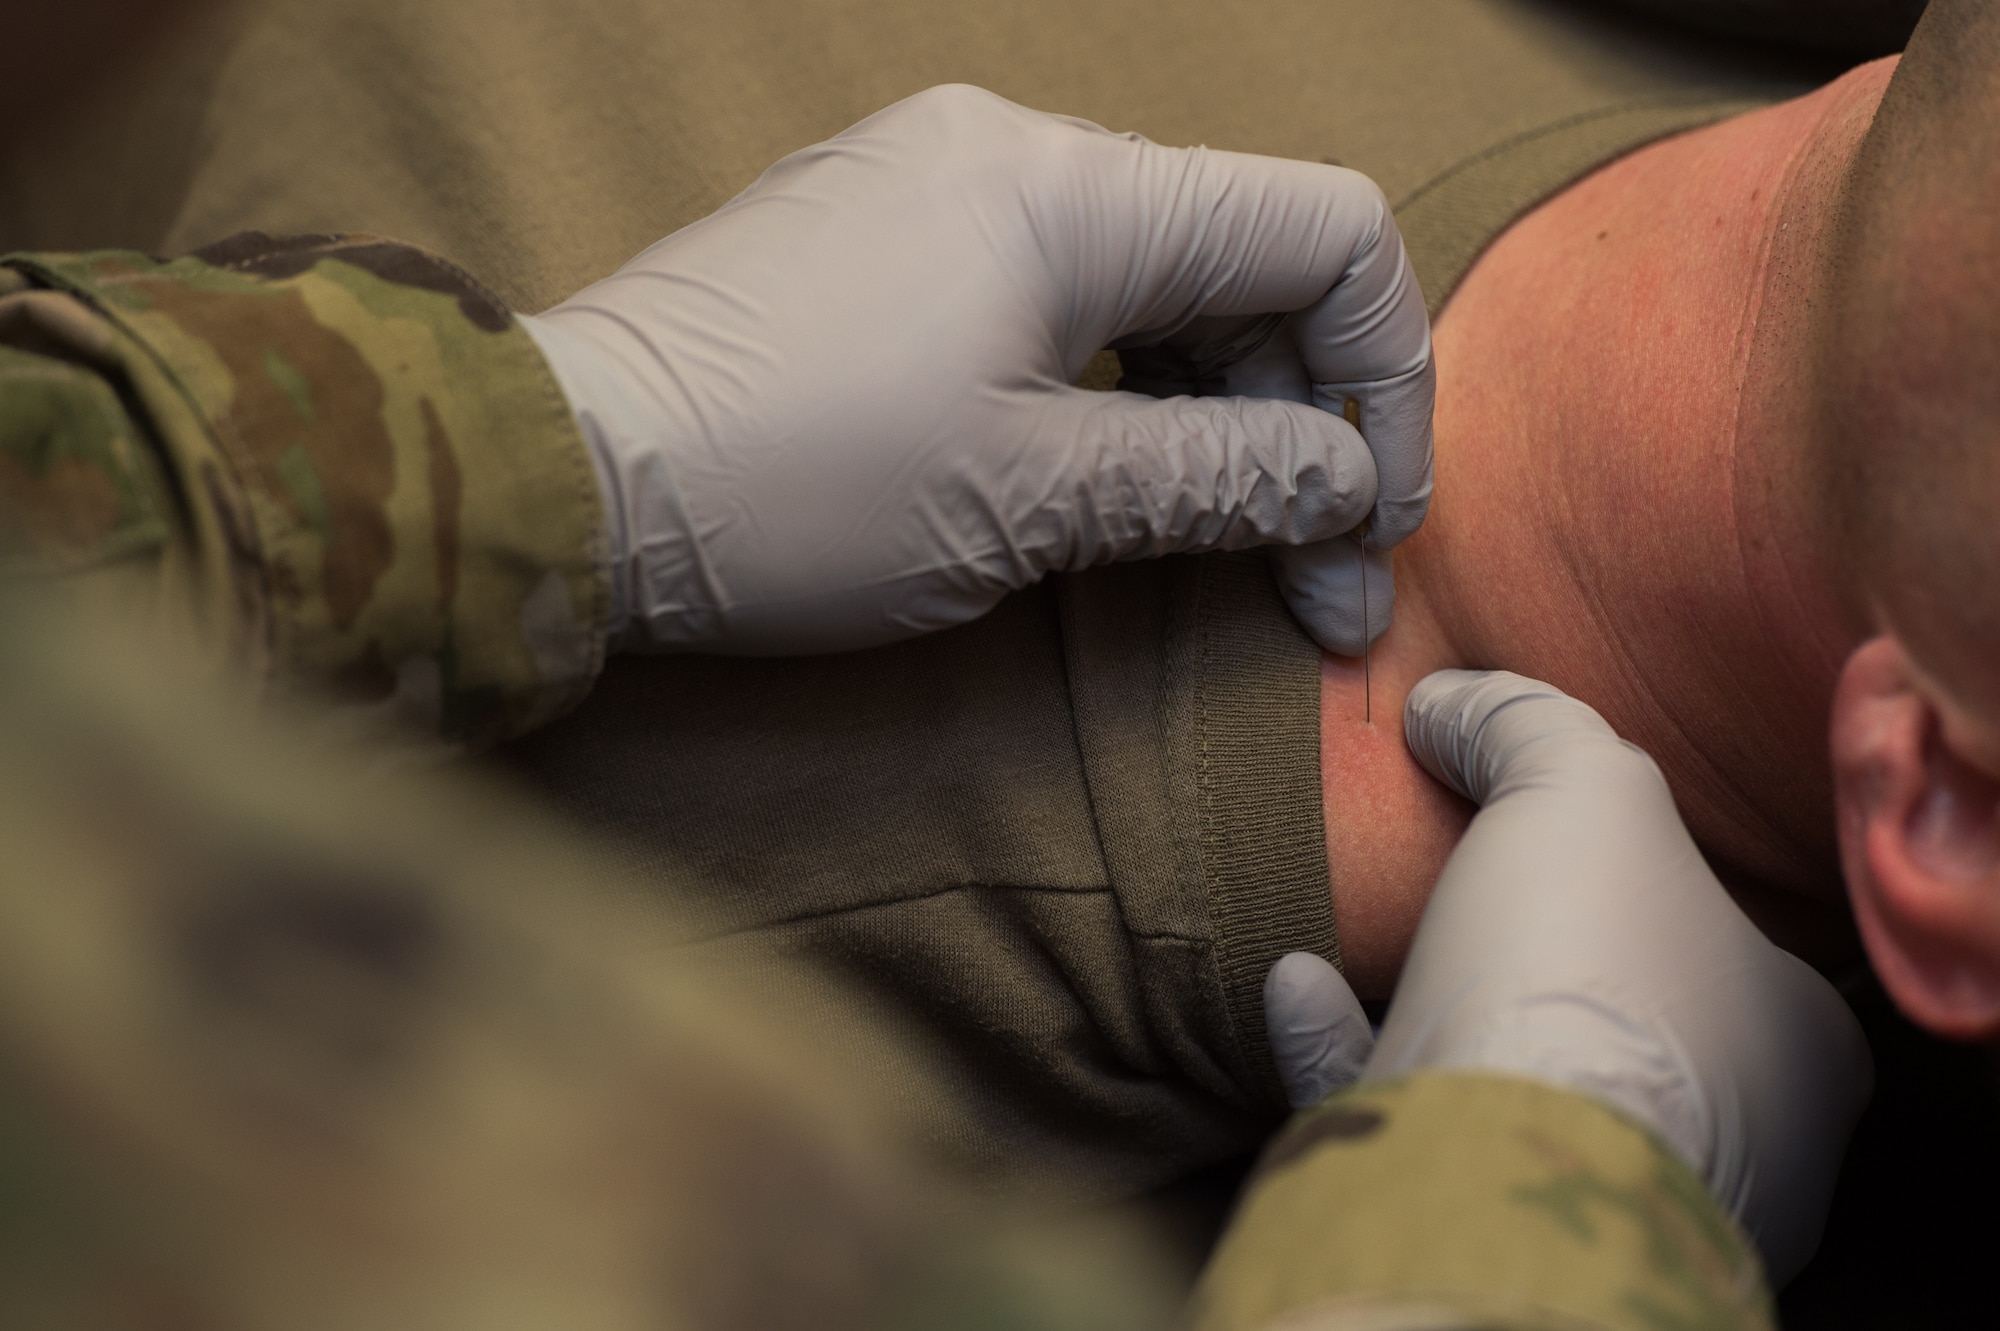 U.S. Air Force Capt. Michelle Jilek, 633rd Medical Operations Squadron physical therapist, performs dry needling on Maj. Seth Rumbarger, 71st Fighter Squadron T-38 Talon pilot, at Joint Base Langley Eustis, Virginia, Nov. 13, 2019.